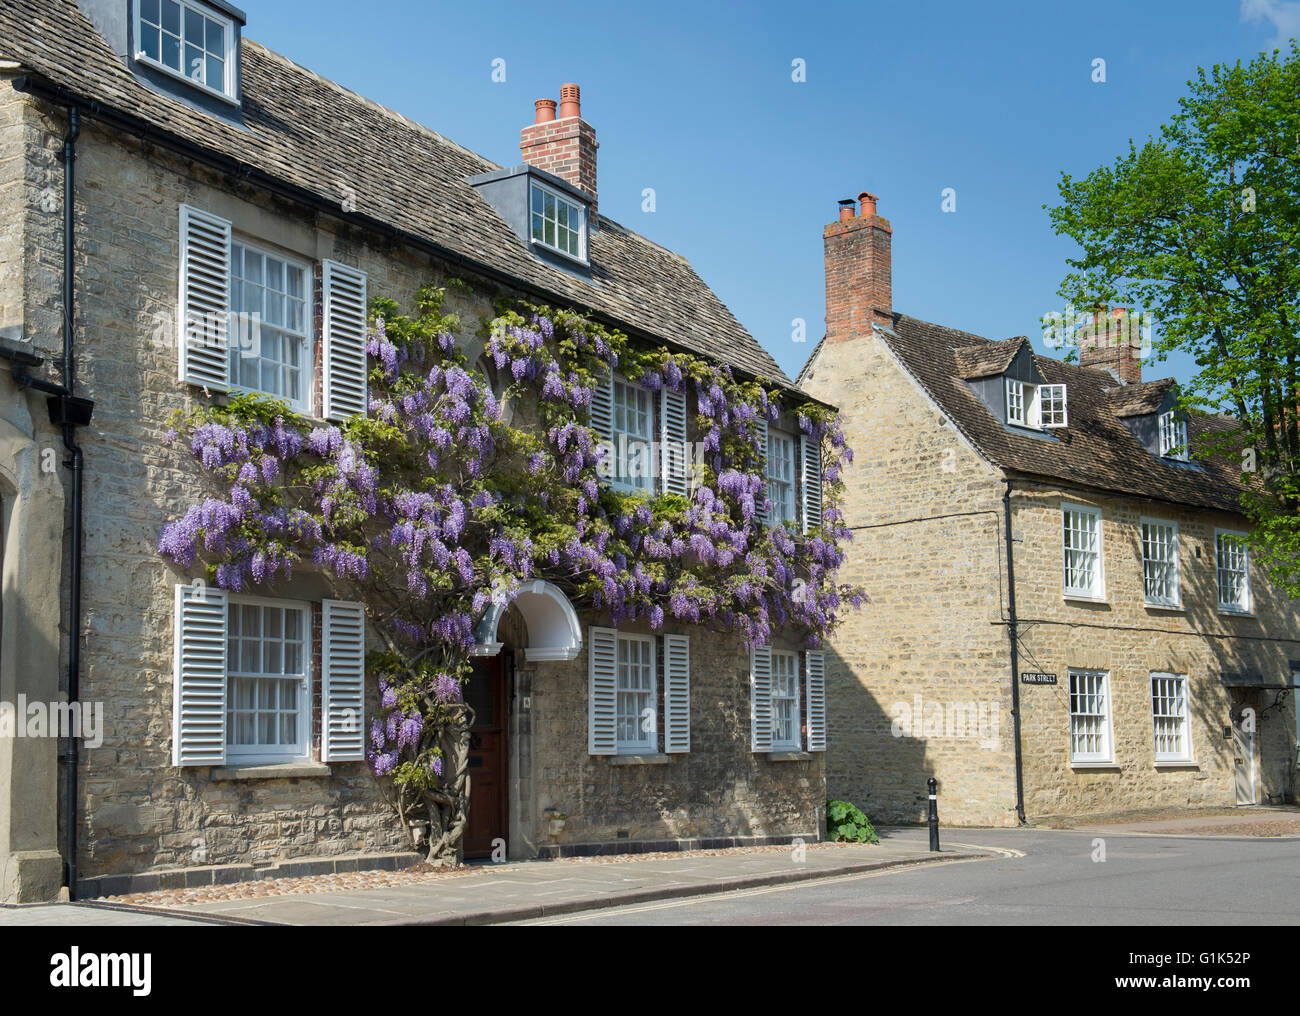 Wisteria on Chaucers house in Woodstock, Oxfordshire, England Stock Photo